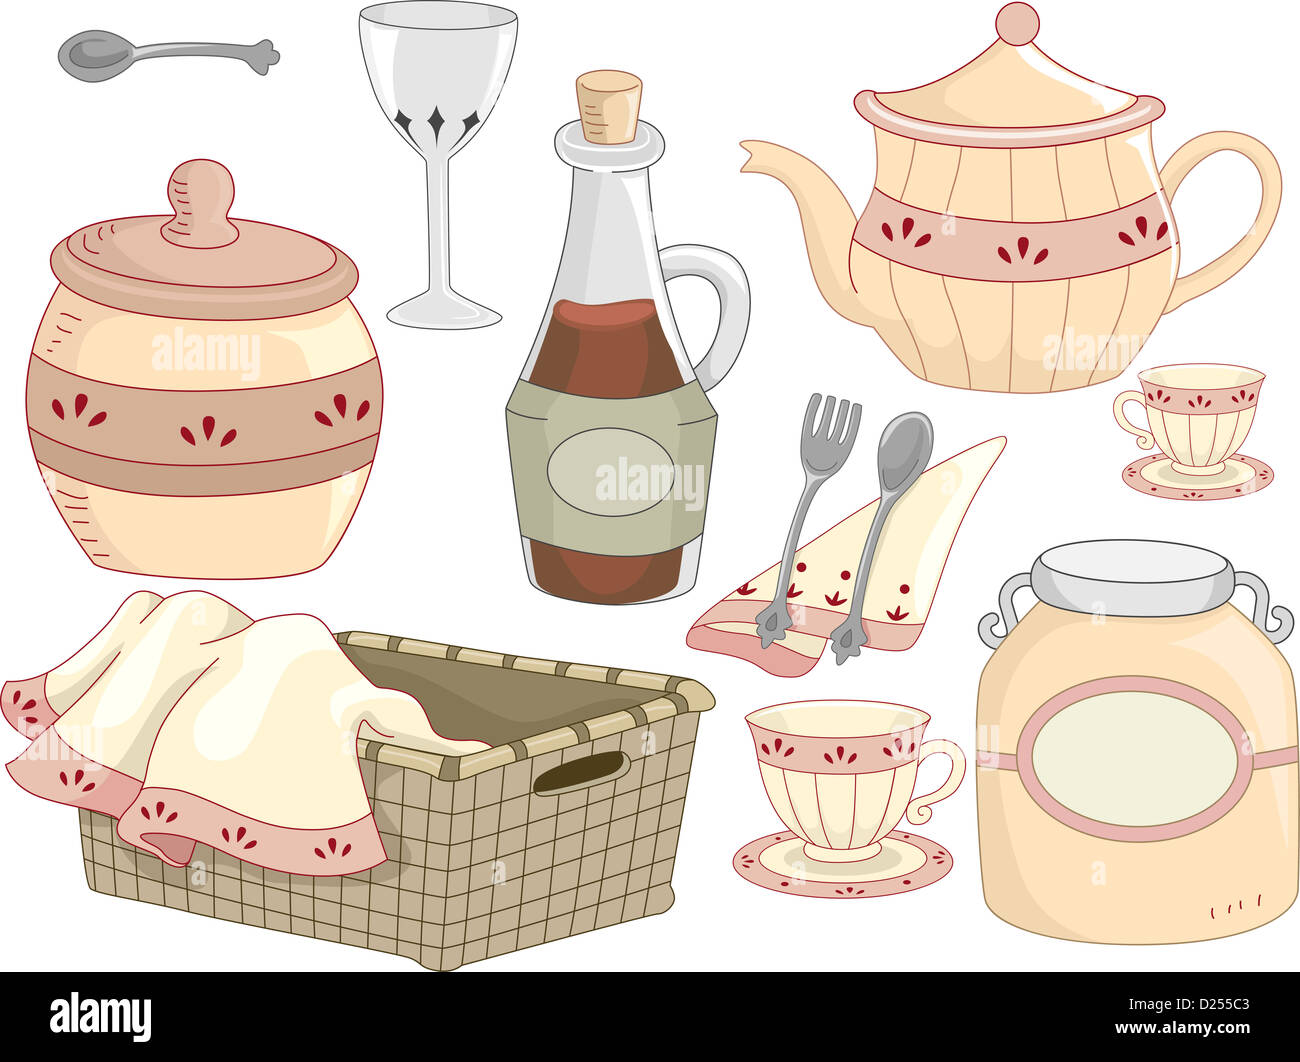 Illustration of Kitchen Tools with a Country Feel Stock Photo